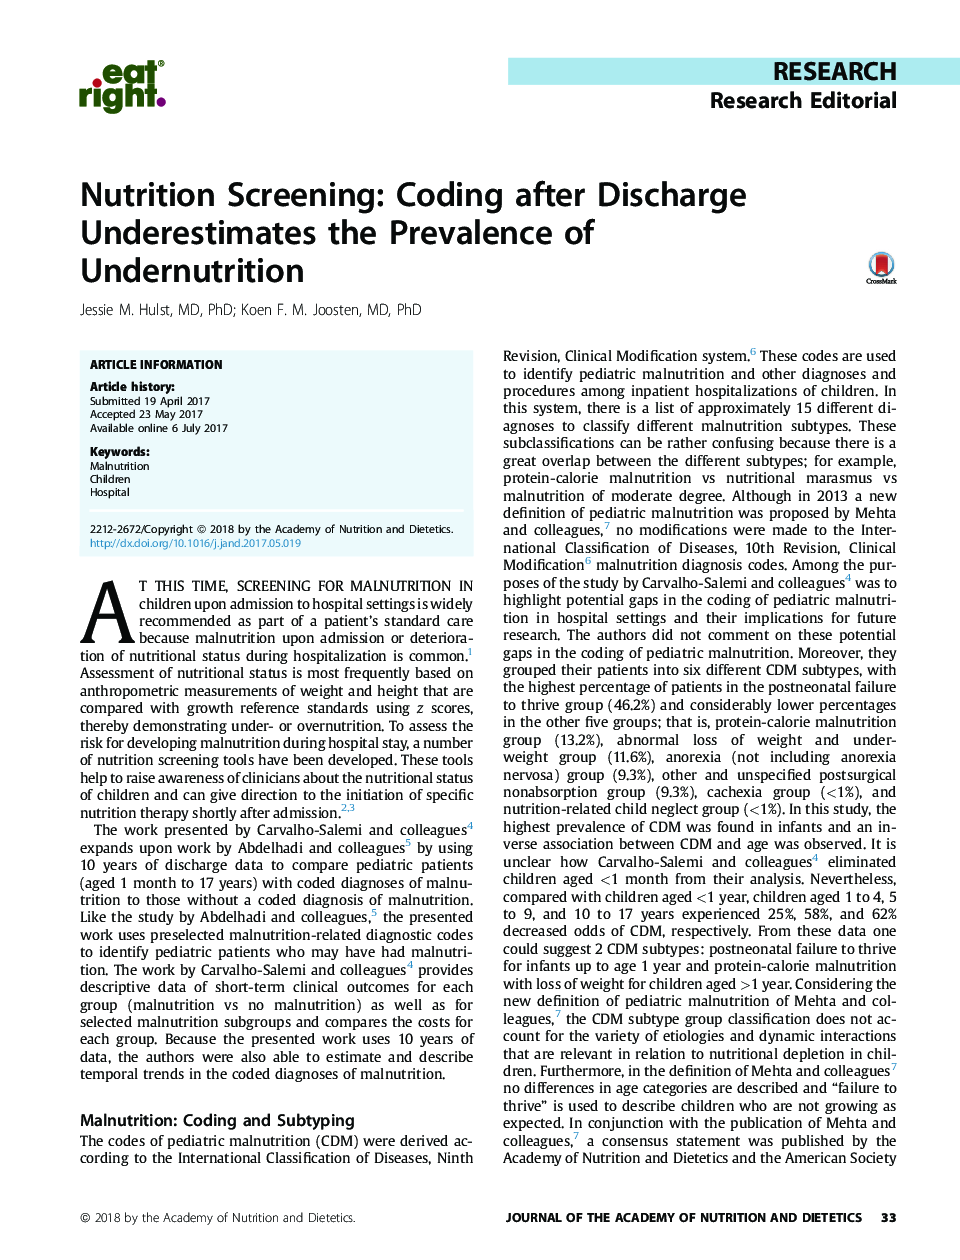 Nutrition Screening: Coding after Discharge Underestimates the Prevalence of Undernutrition